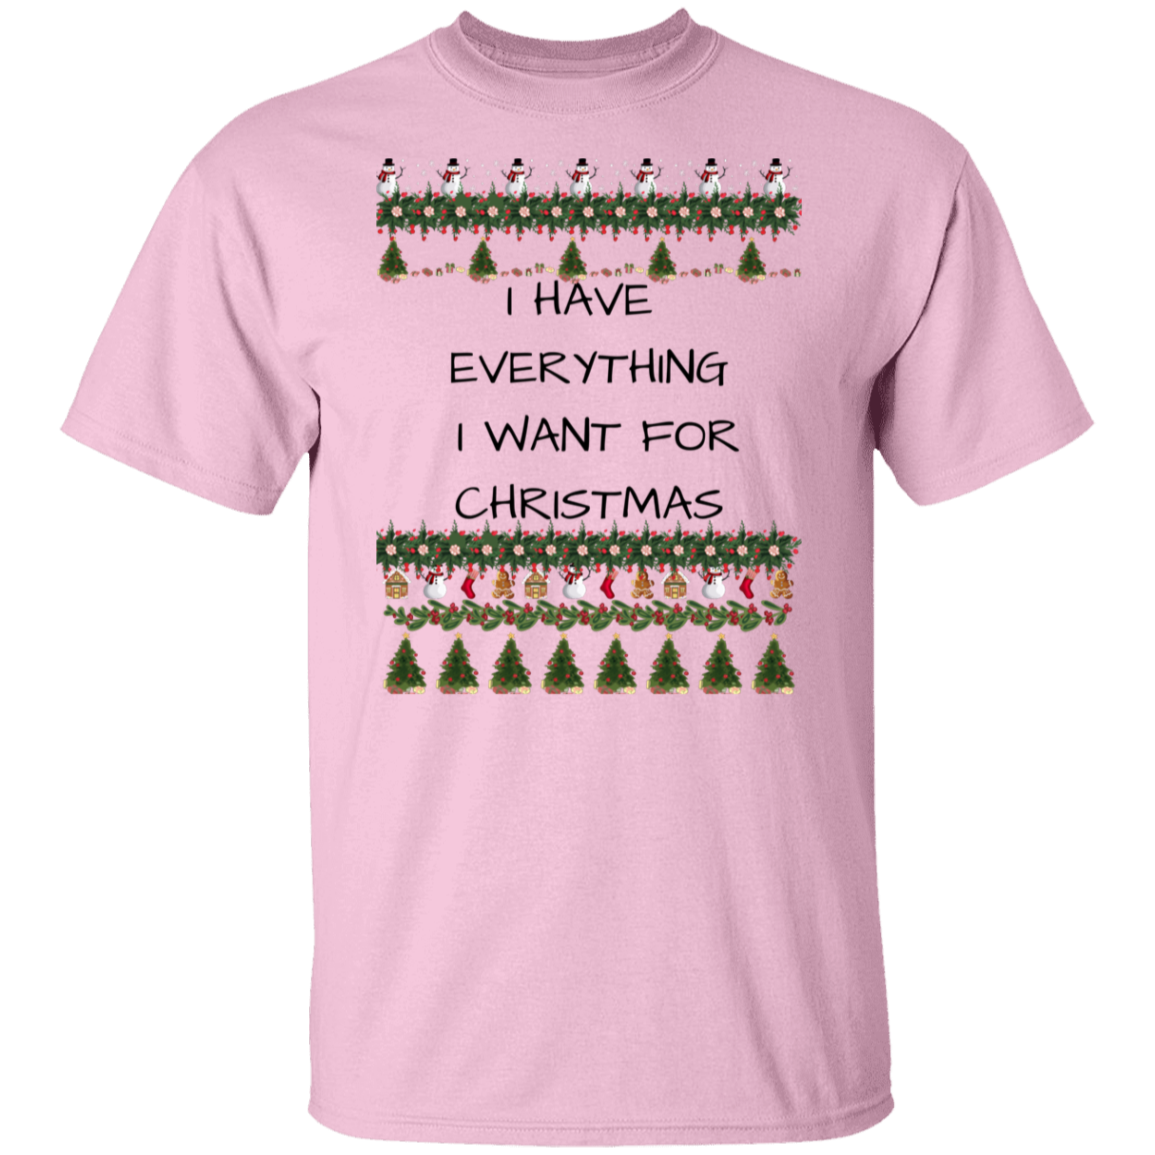 I HAVE EVERYTHING T-Shirt